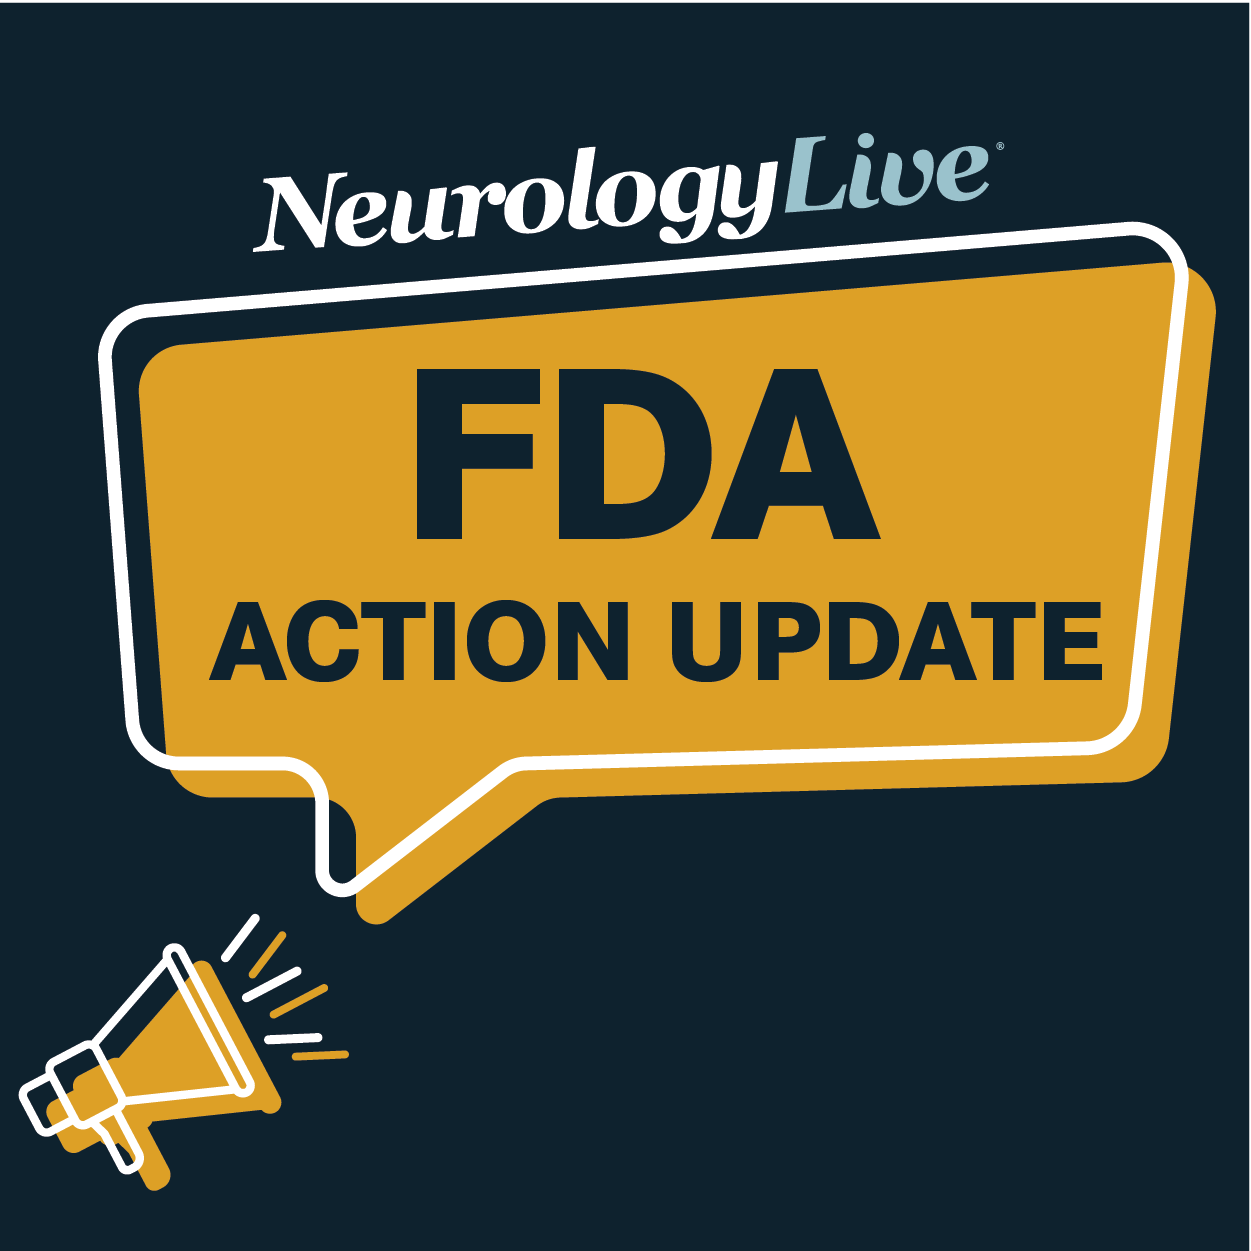 FDA Action Update, July 2022: Application Acceptances, Approvals, and Clinical Holds